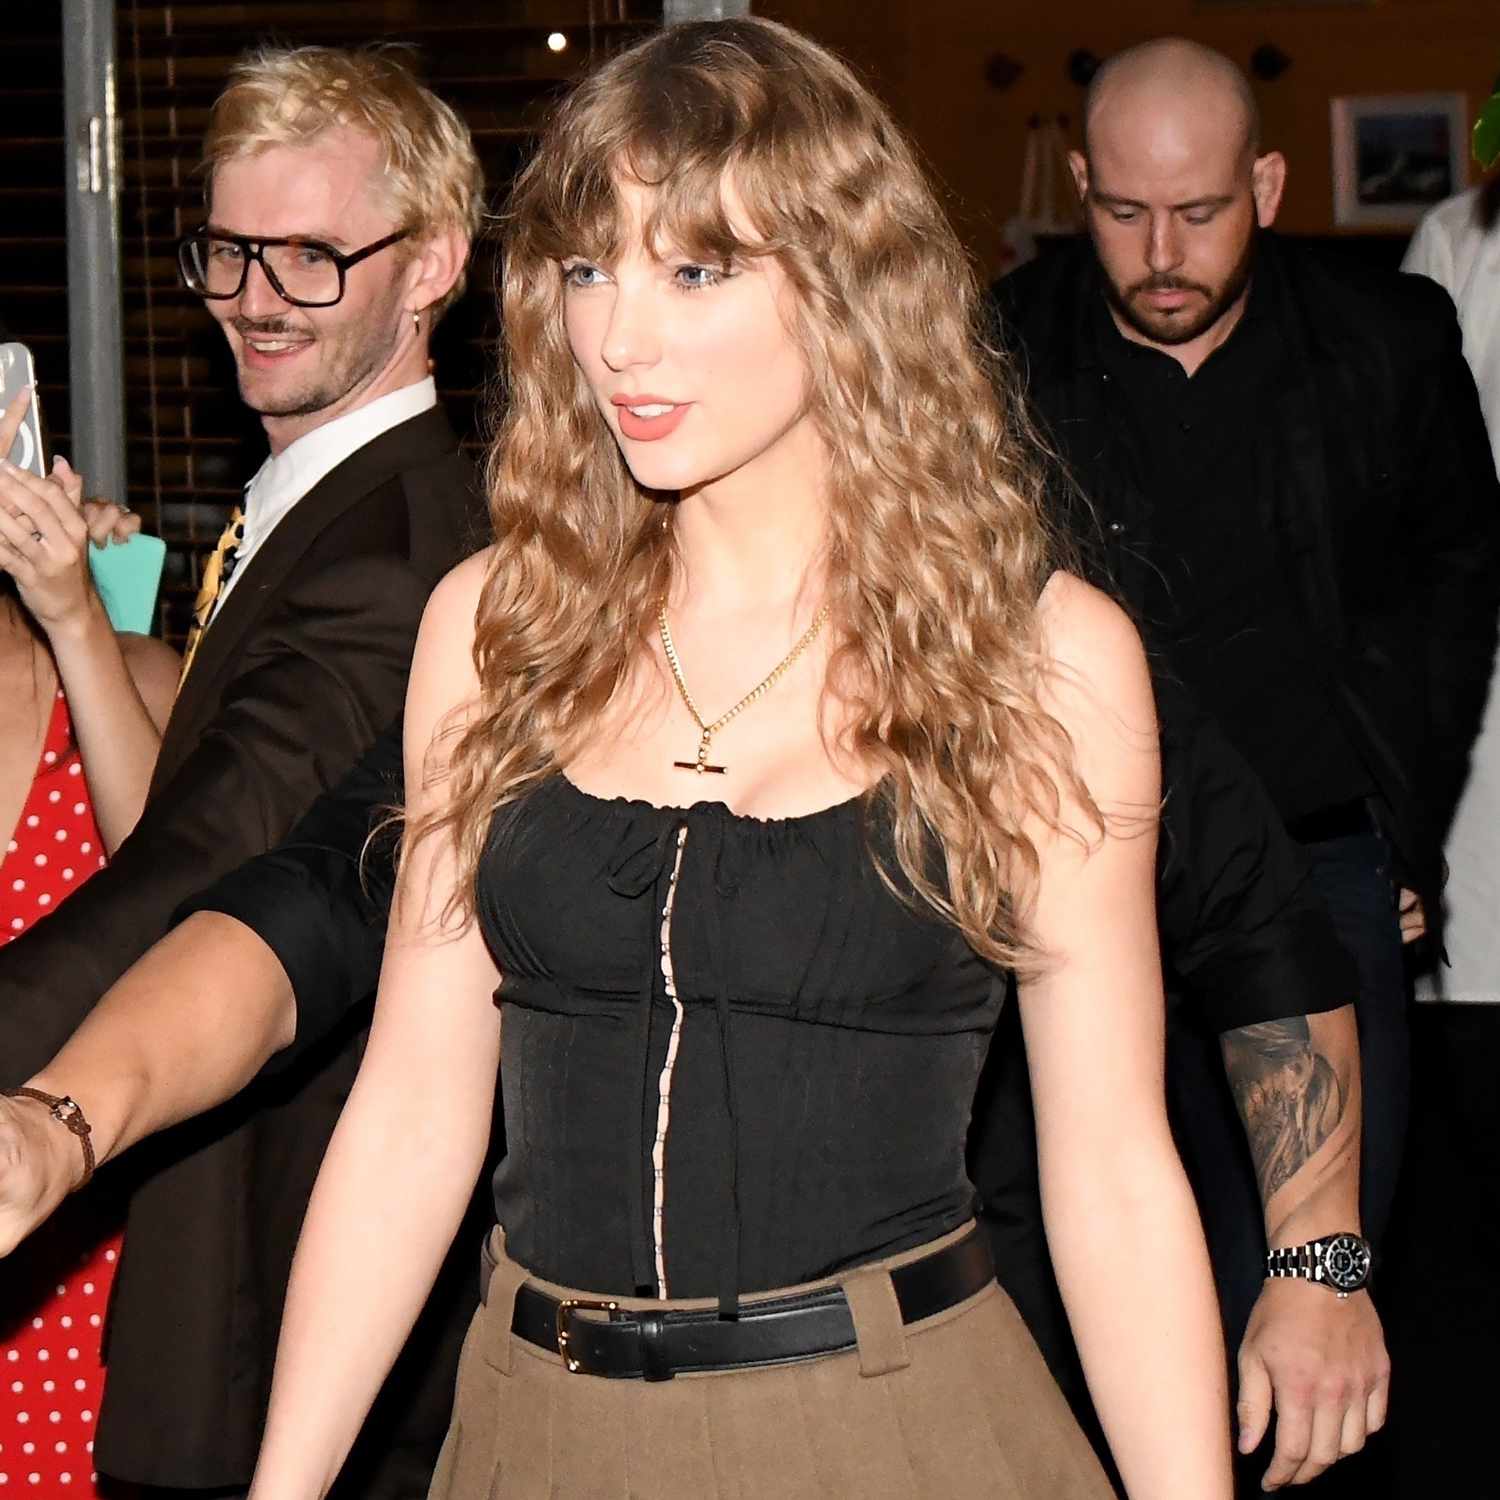 Taylor Swift was spotted leaving Pellegrino 2000 bar and restaurant on Tuesday evening, just ahead of her sold-out stadium shows. The 